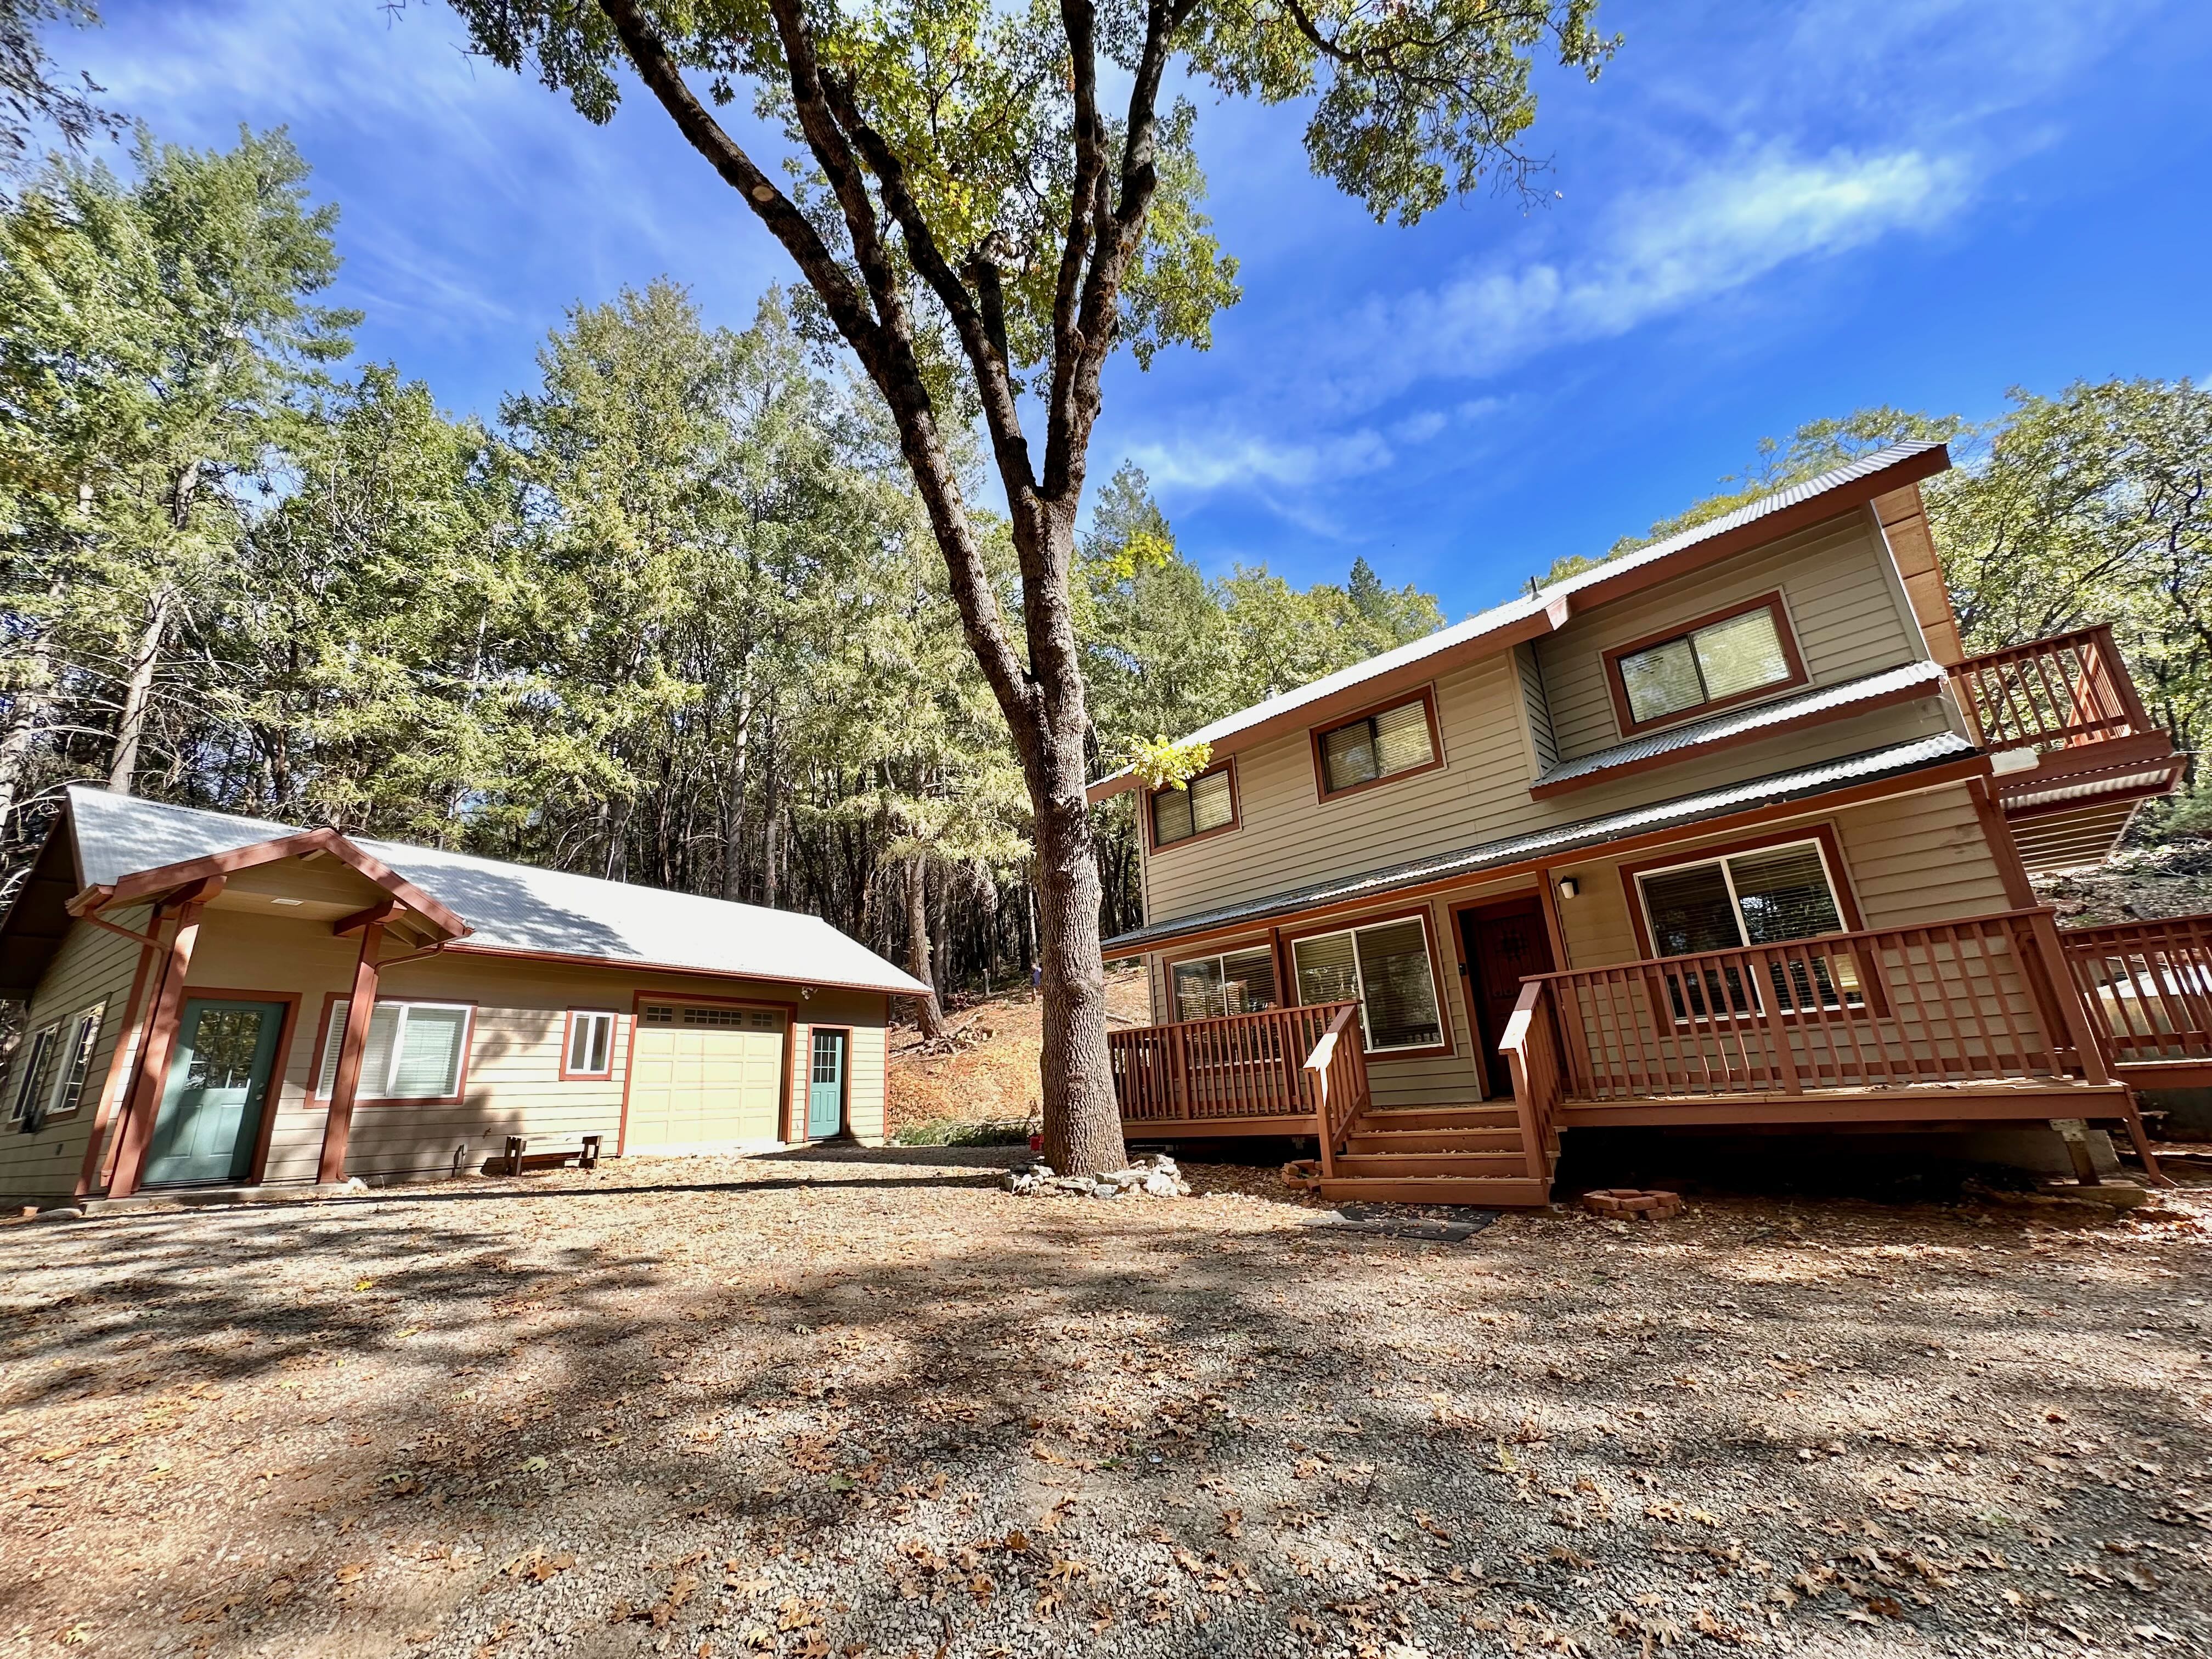 FOR RENT: 14594 Mill Creek Lane, Grass Valley, CA